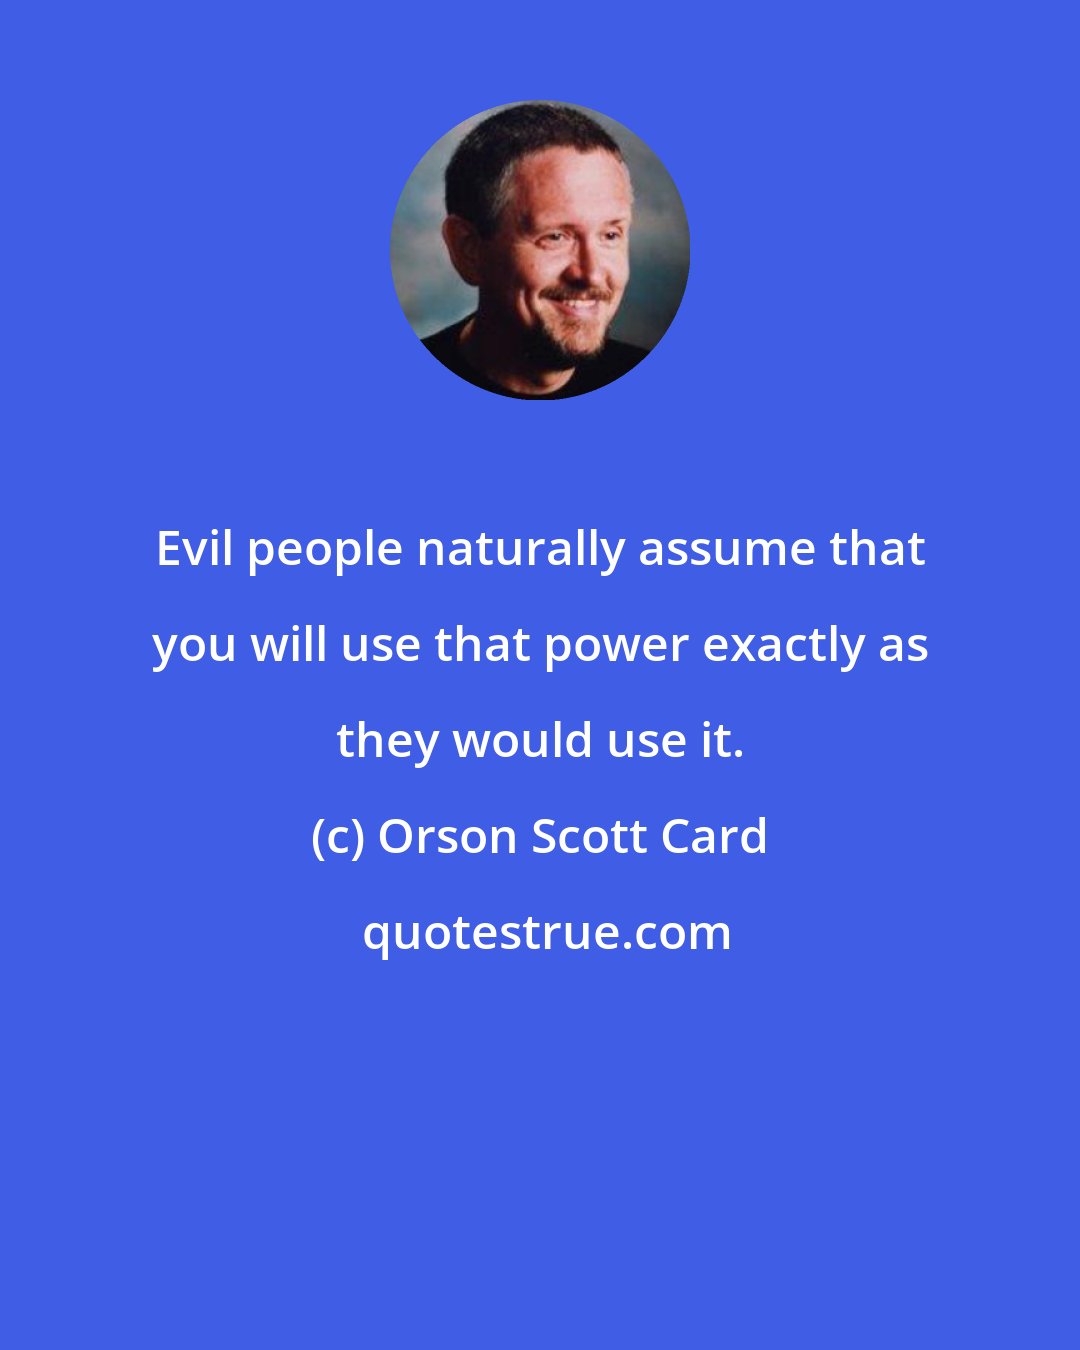 Orson Scott Card: Evil people naturally assume that you will use that power exactly as they would use it.